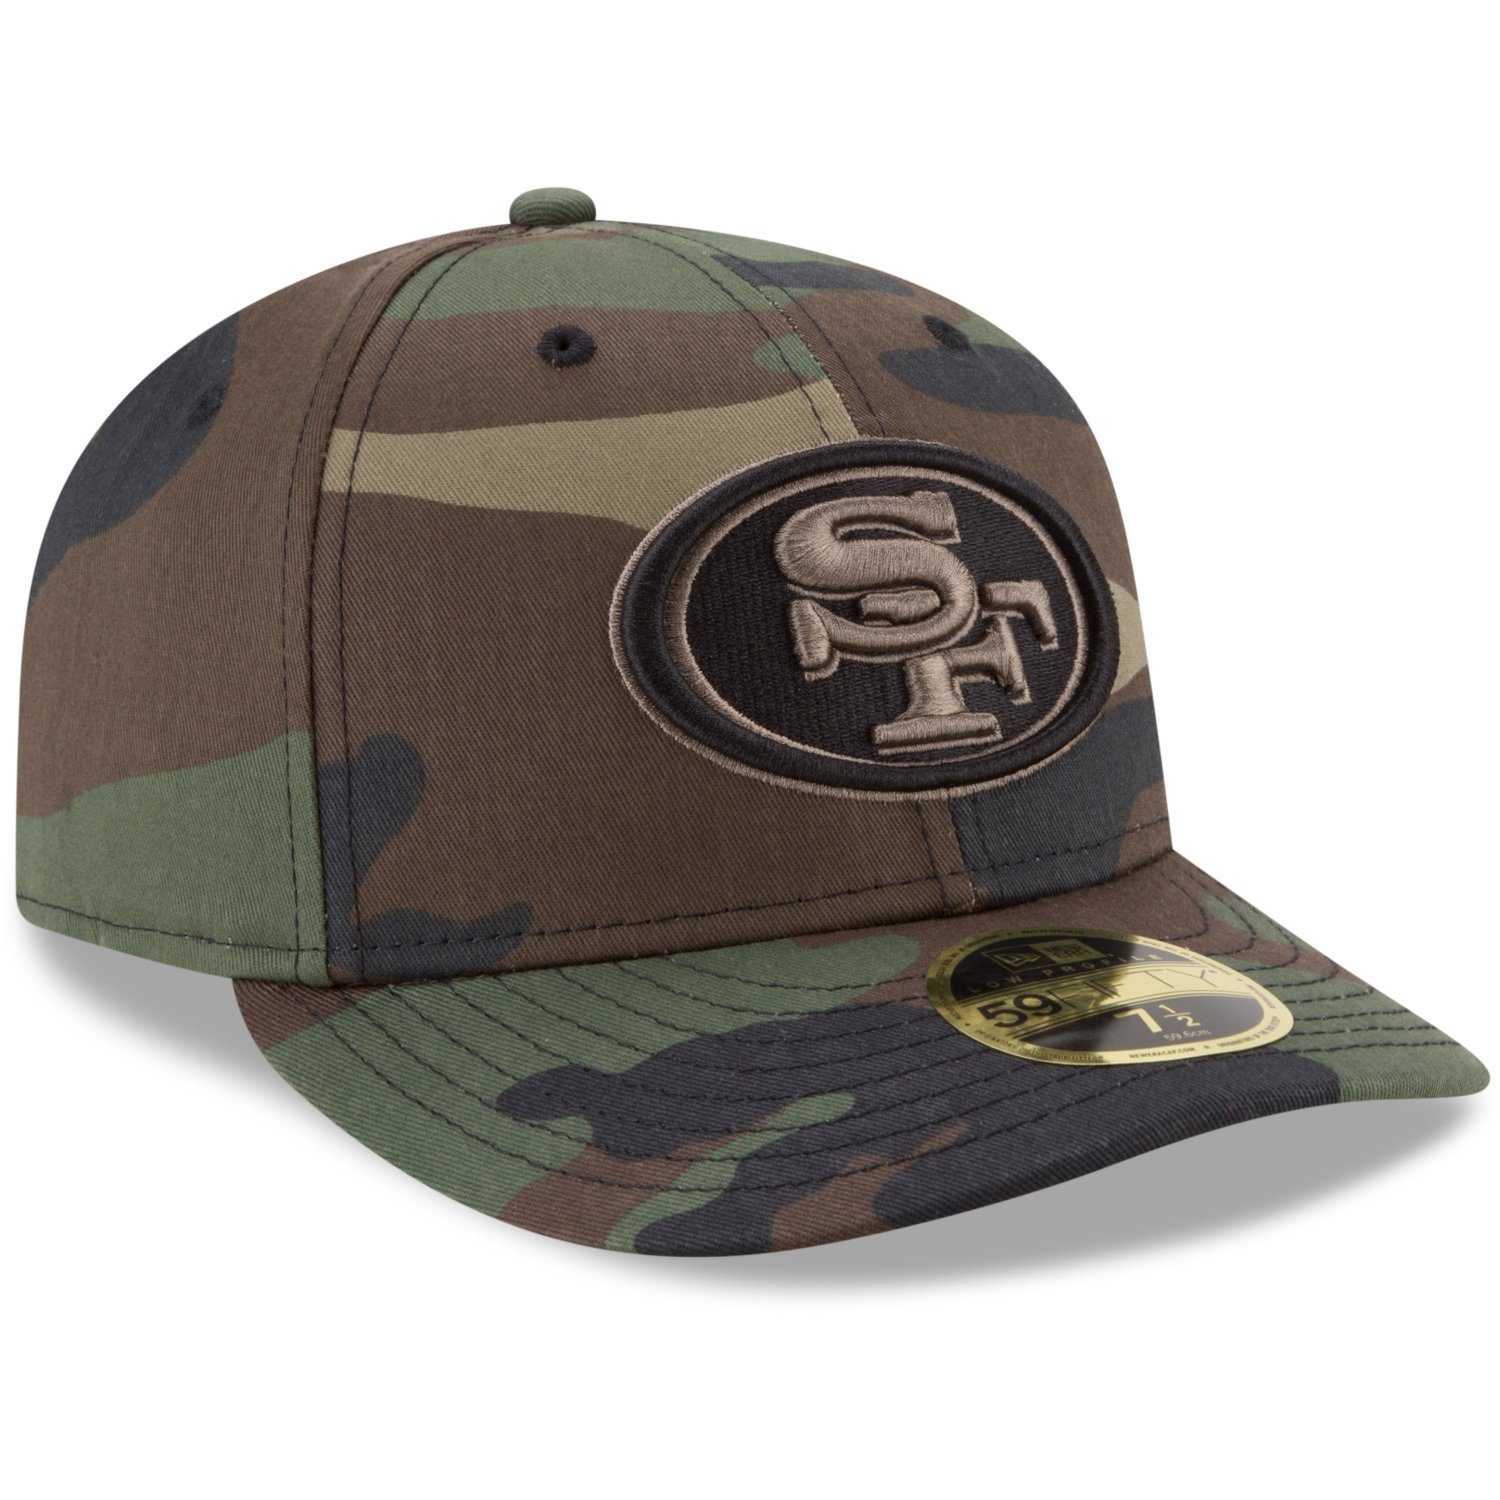 New Era Fitted Cap Low San Francisco NFL 59Fifty Teams Profile woodland 49ers